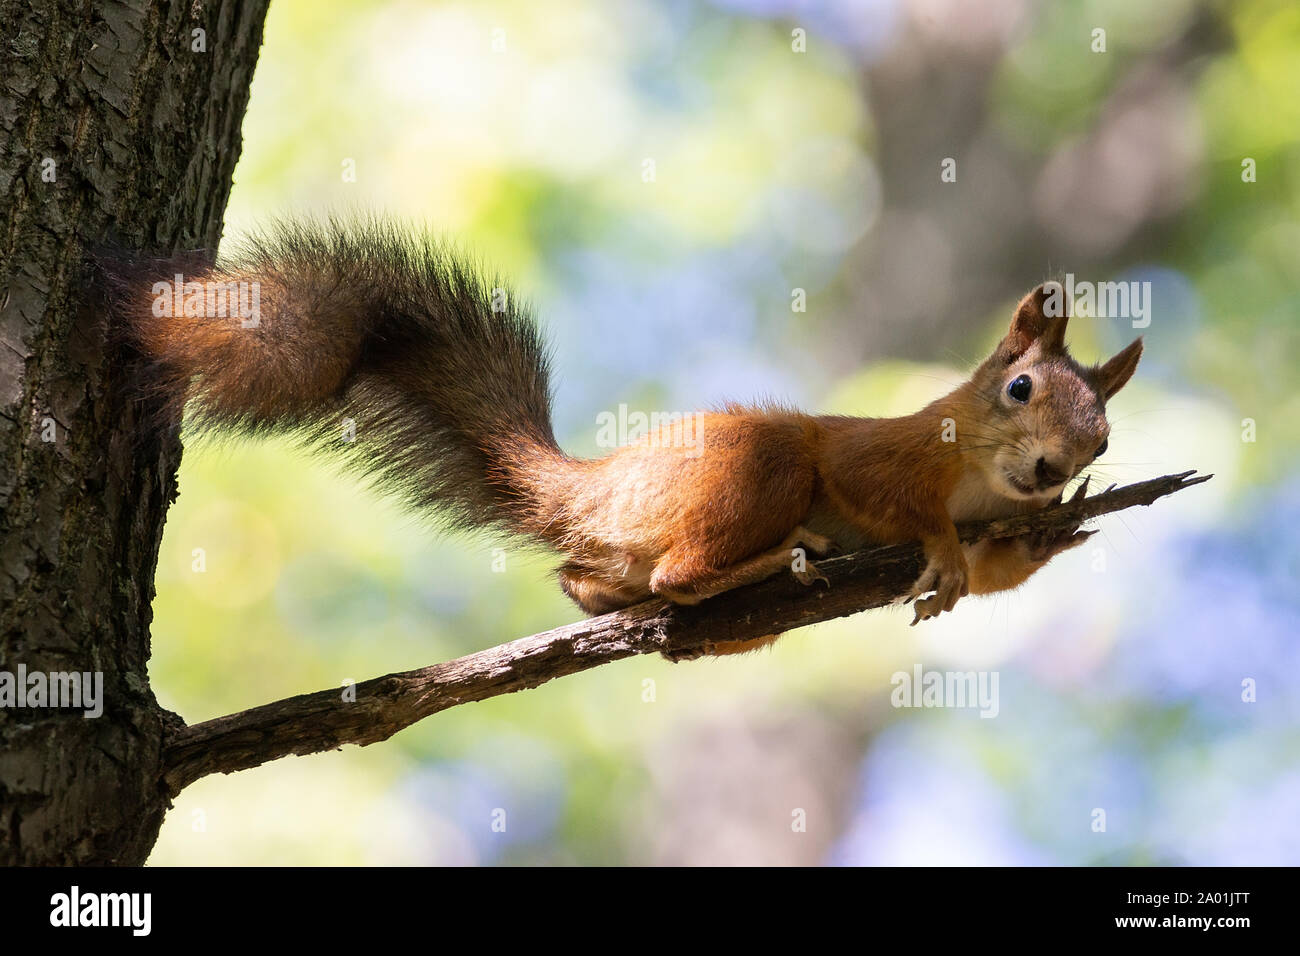 Red squirrel, Sciurus vulgaris, Cute arboreal, omnivorous rodent with long tail, climbing in the tree. Portrait of eurasian squirrel in natural enviro Stock Photo